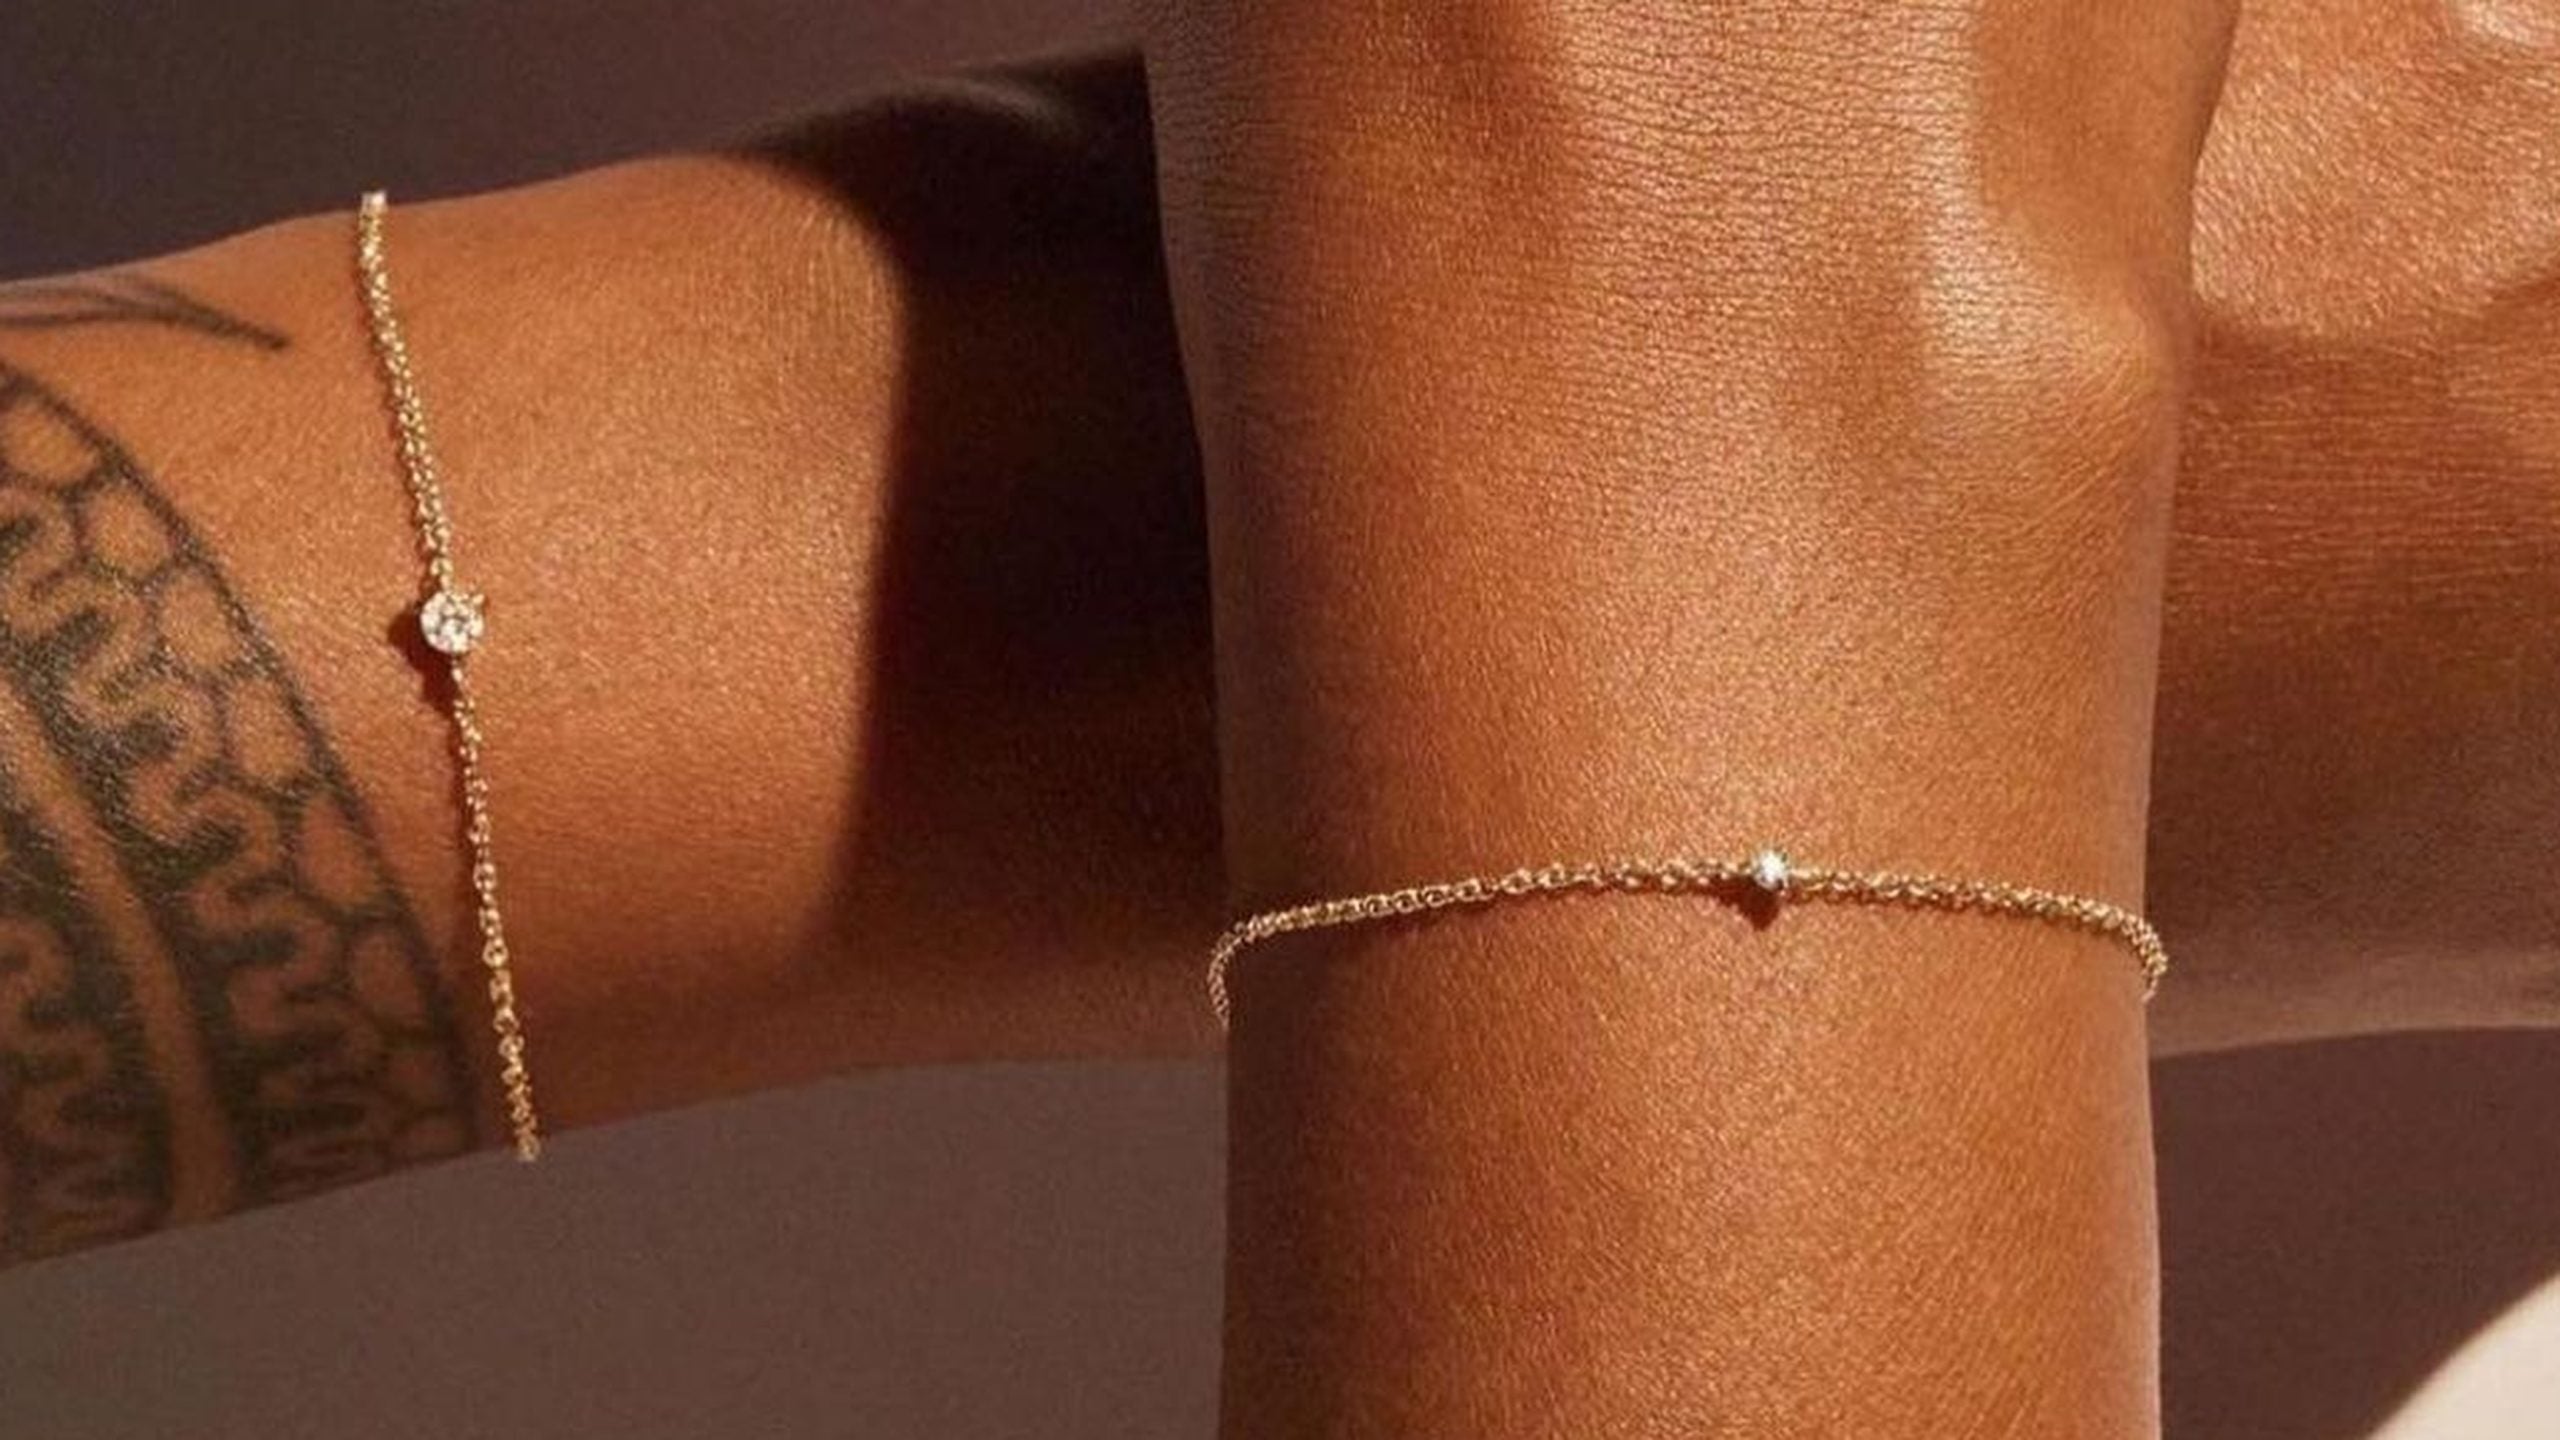 Catbird's Forever Bracelet Will Have Your Wrist Dazzling Every Day